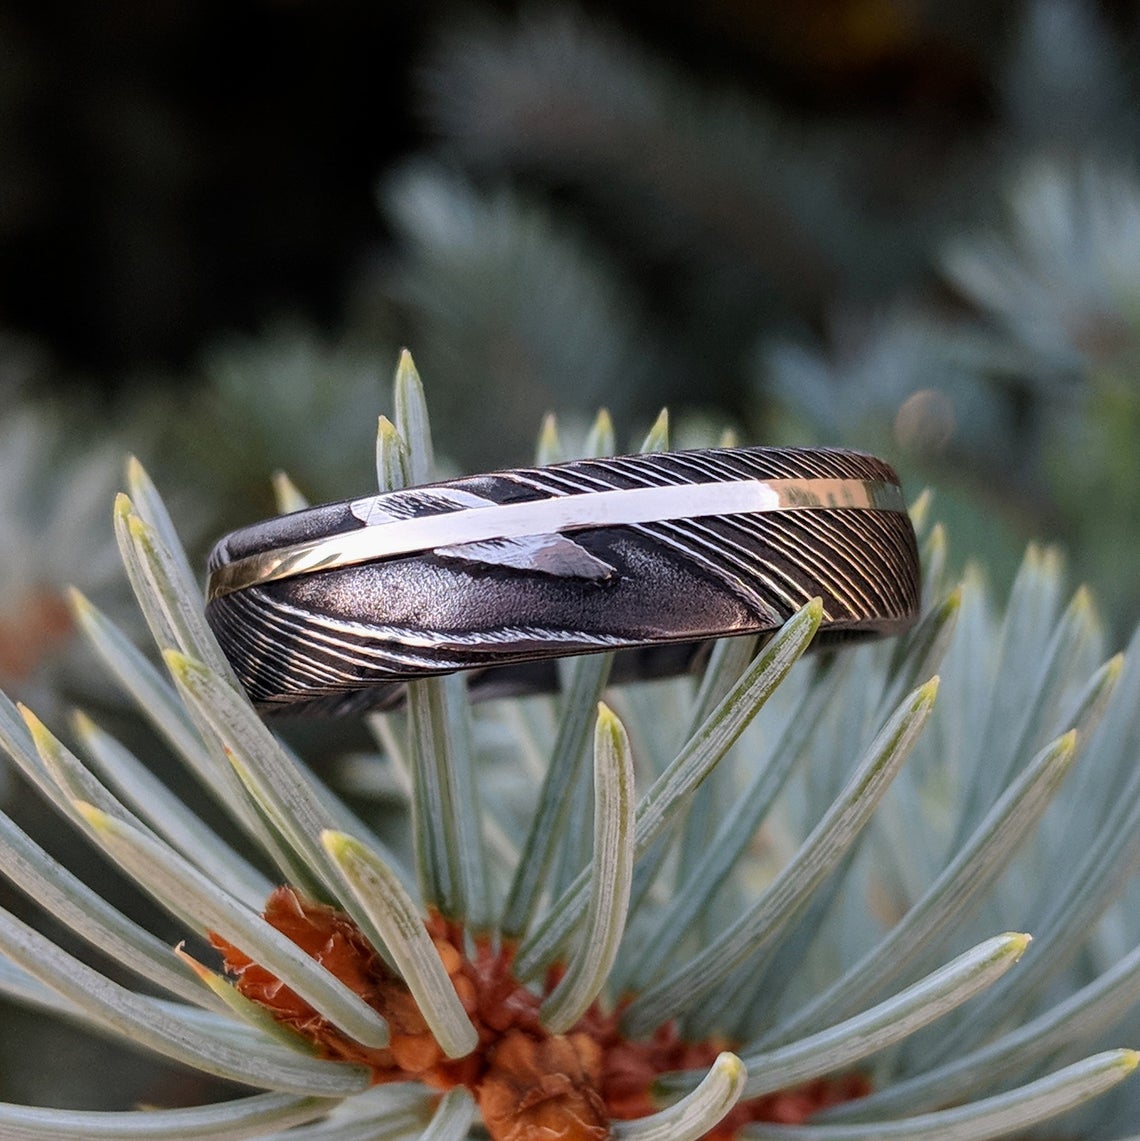 6mm wide black Damascus steel ring with an off-center white gold inlay